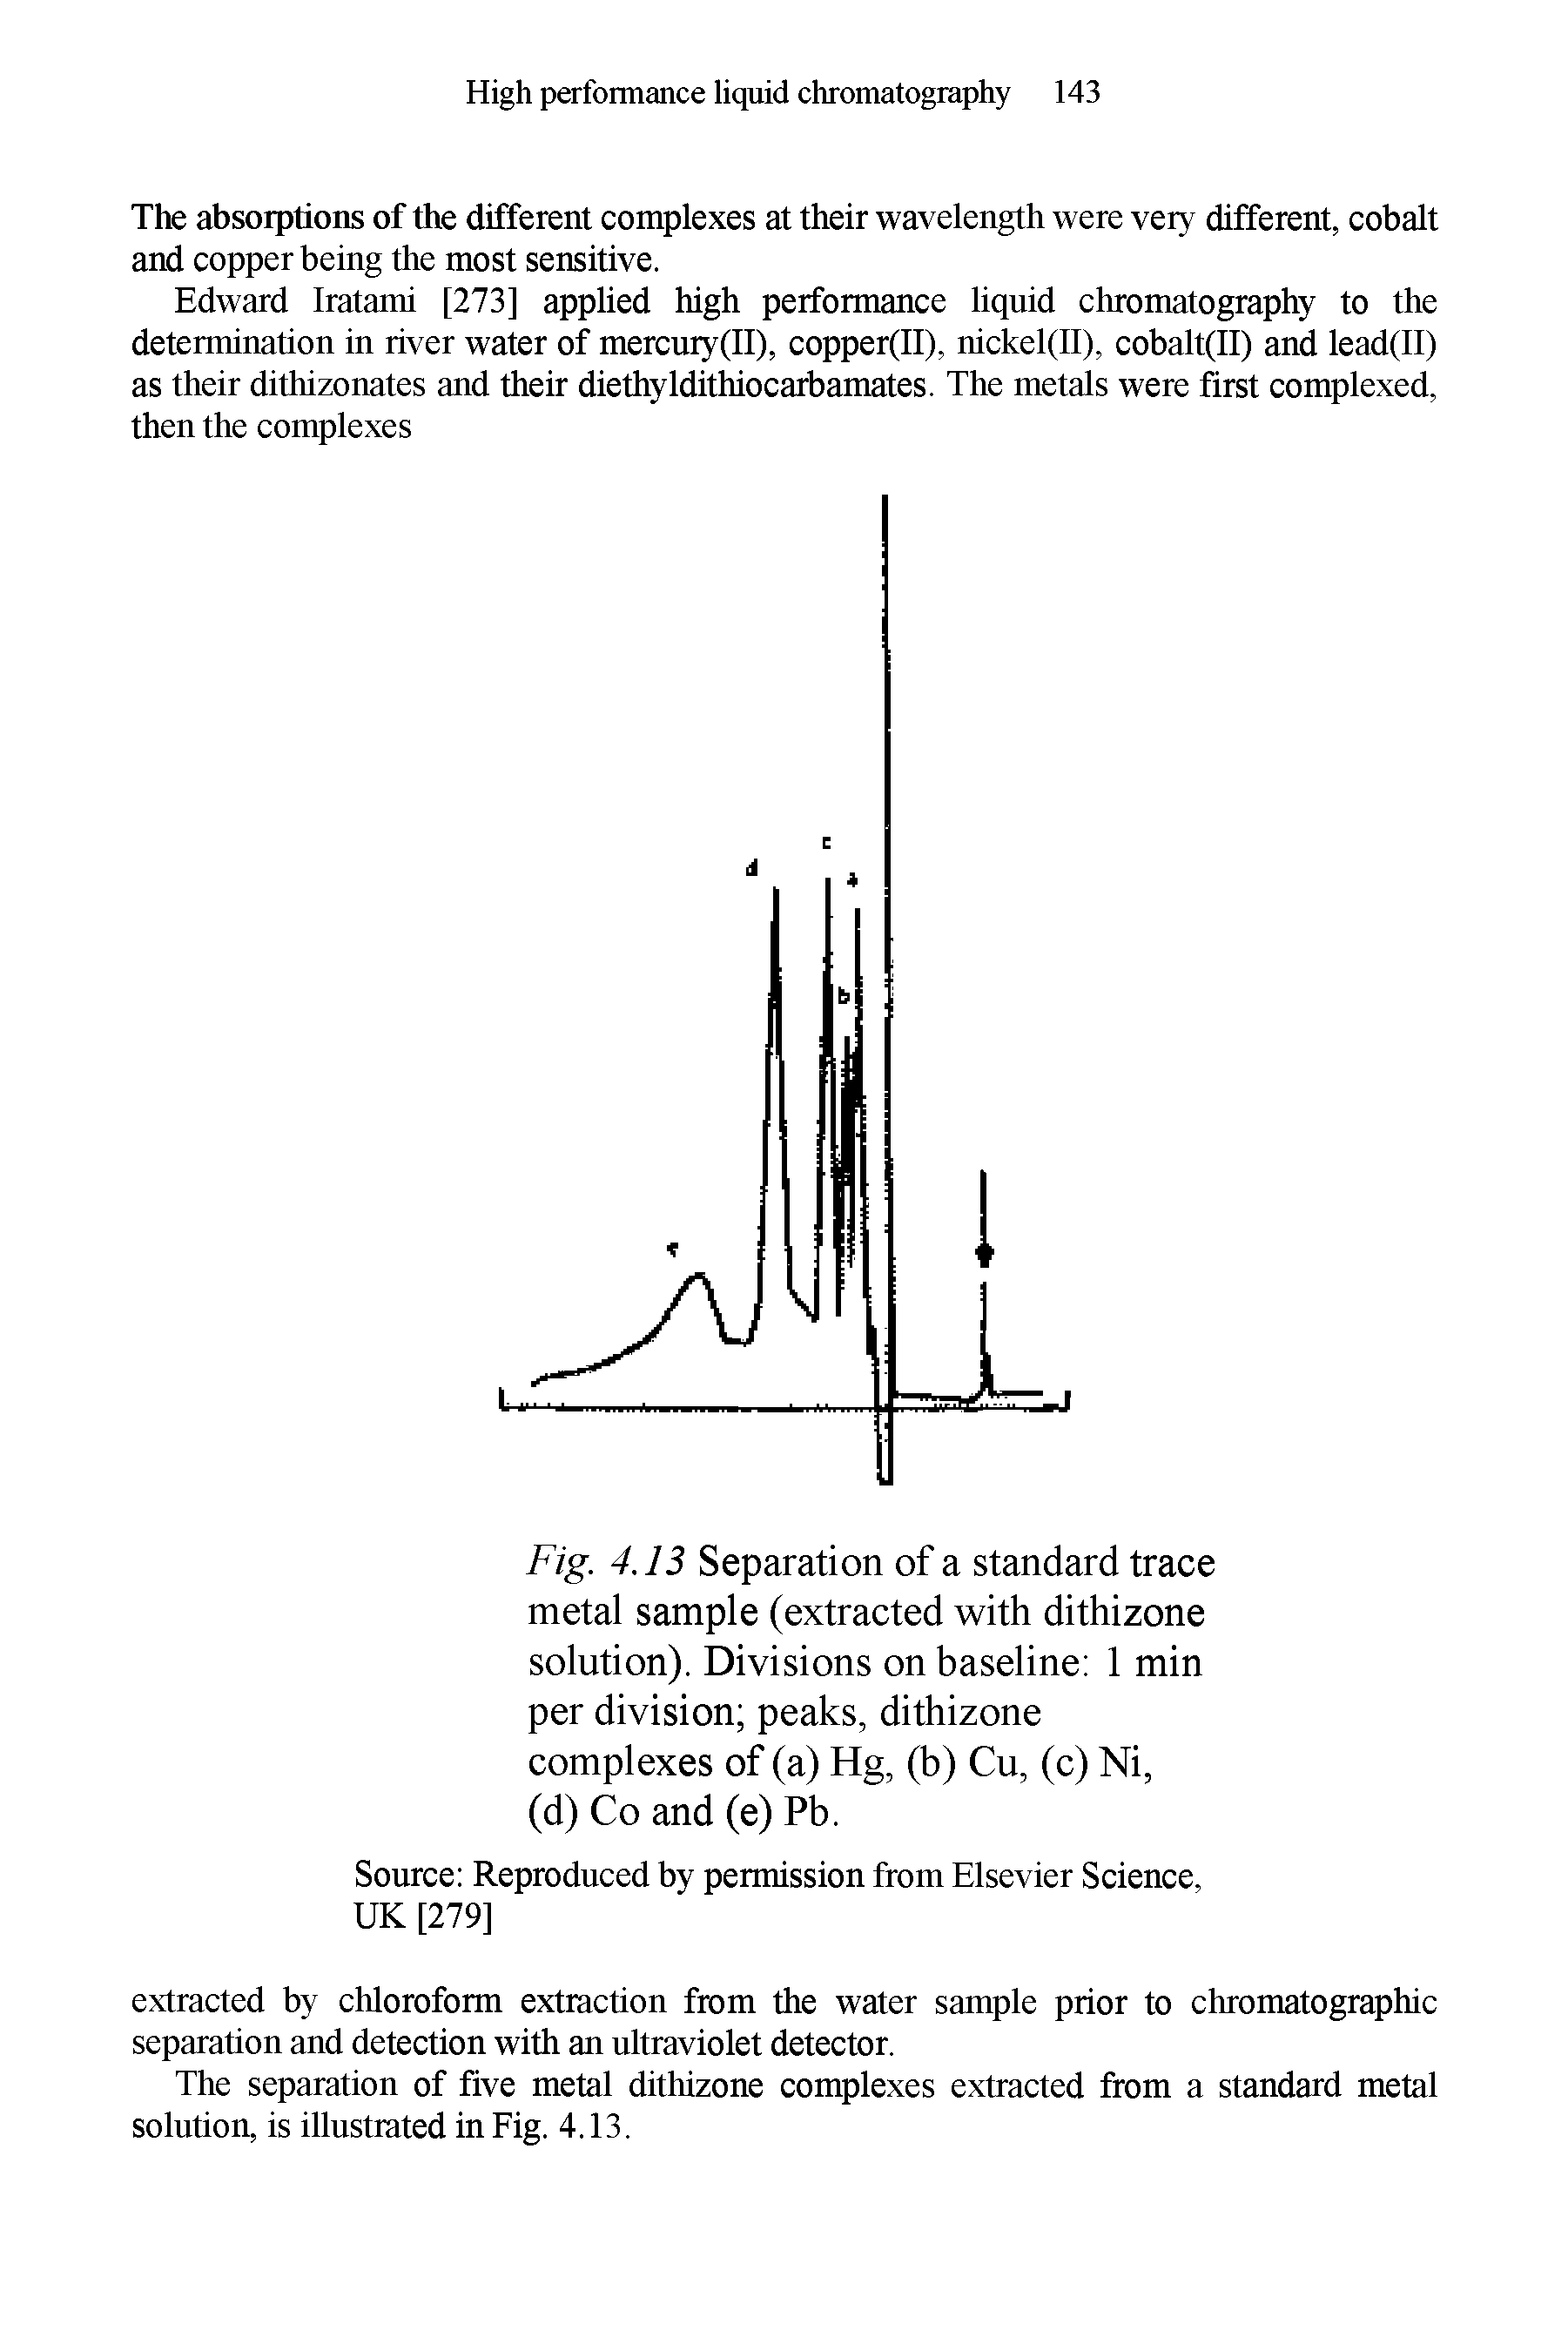 Fig. 4.13 Separation of a standard trace metal sample (extracted with dithizone solution). Divisions on baseline 1 min per division peaks, dithizone complexes of (a) Hg, (b) Cu, (c) Ni,...